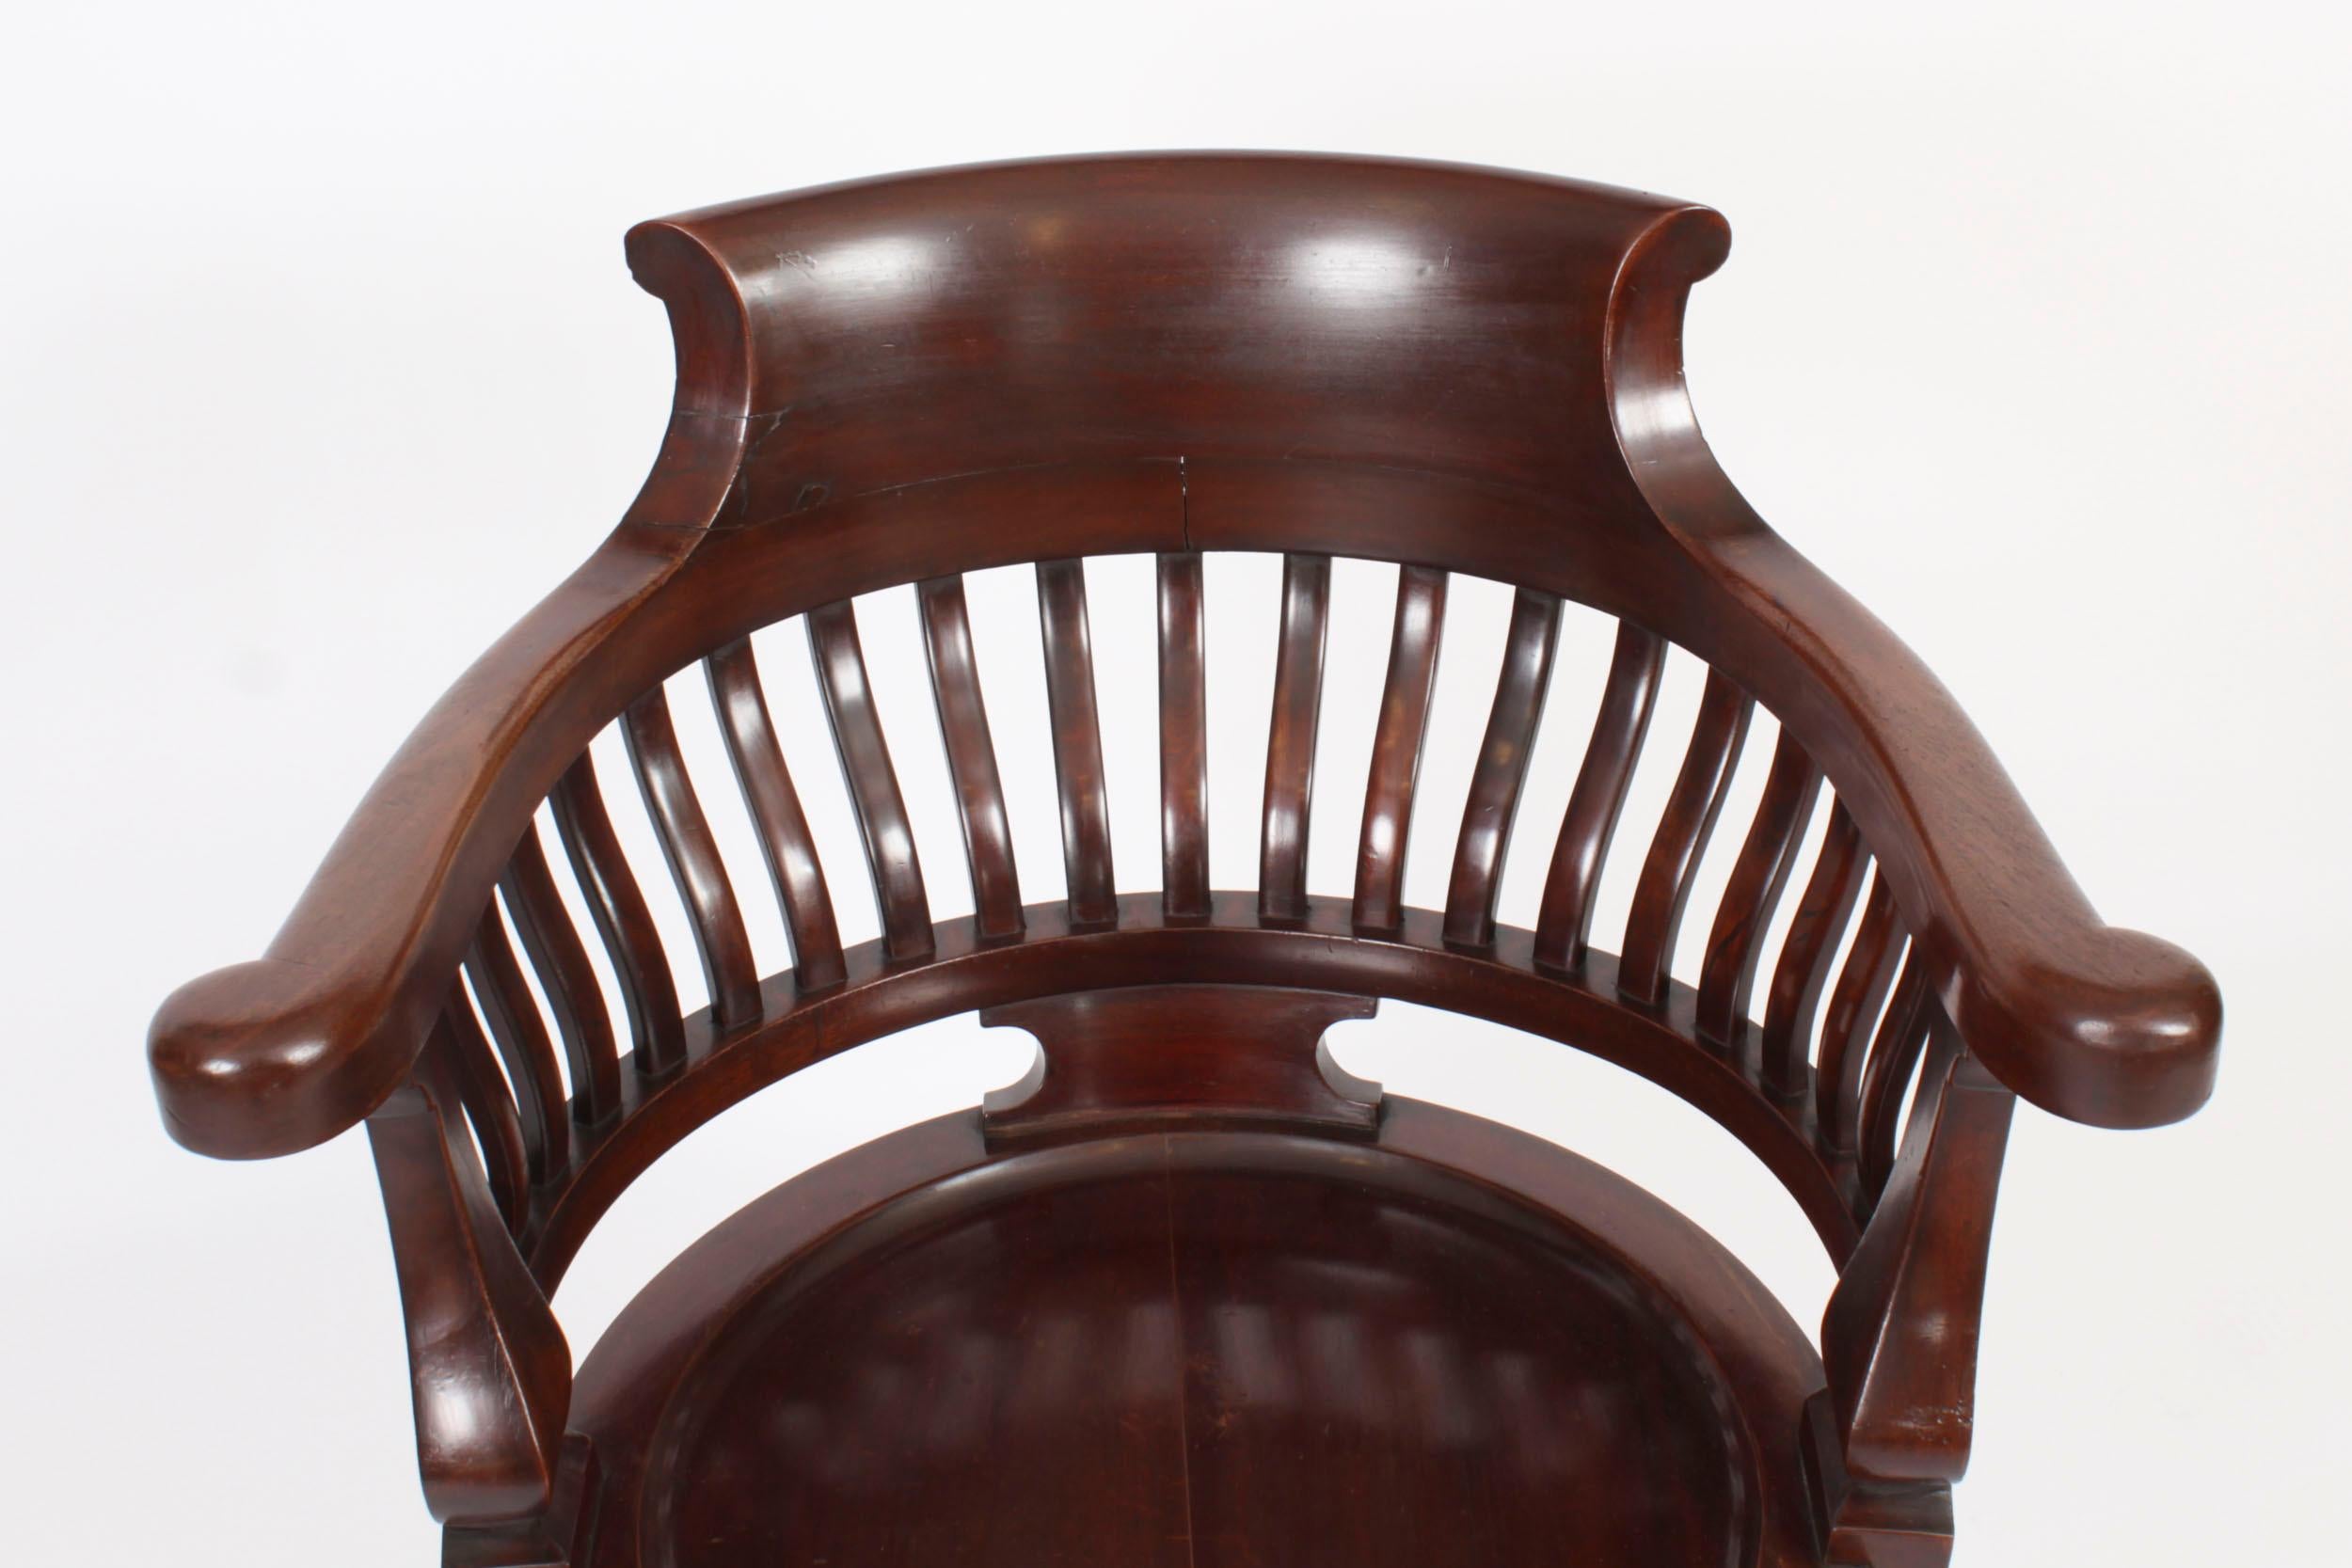 This is a  superb antique late 19th Century walnut revolving desk chair, circa 1880 in date.

It is made of high quality solid solid walnut with a beautiful and decorative slatted carved back with shepherd's crook arms and a saddle seat. It is